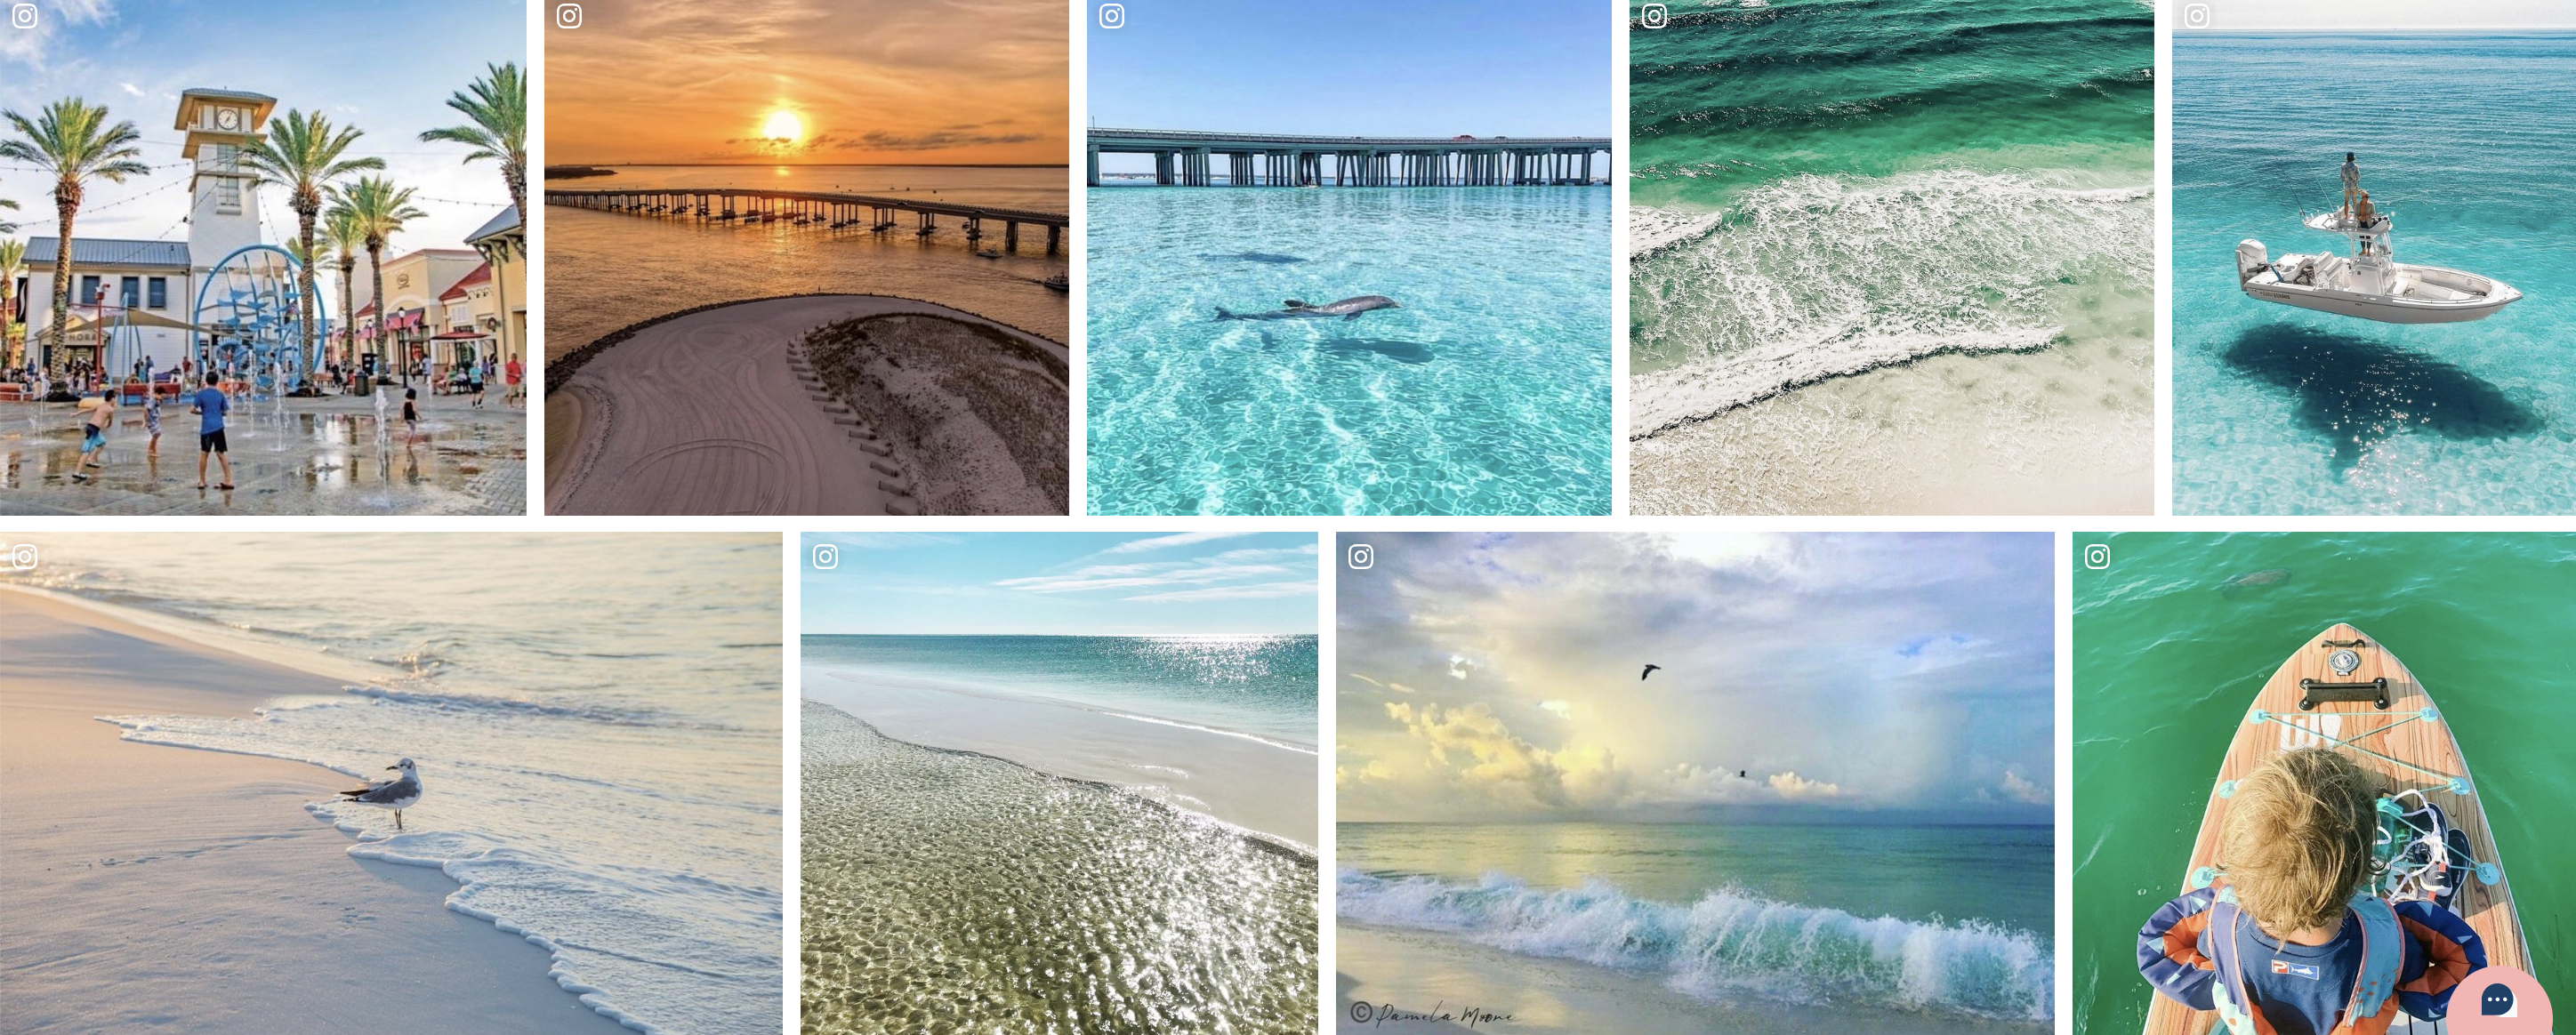 Destin, Florida: A Top Pick for the Best Summer Family Vacation